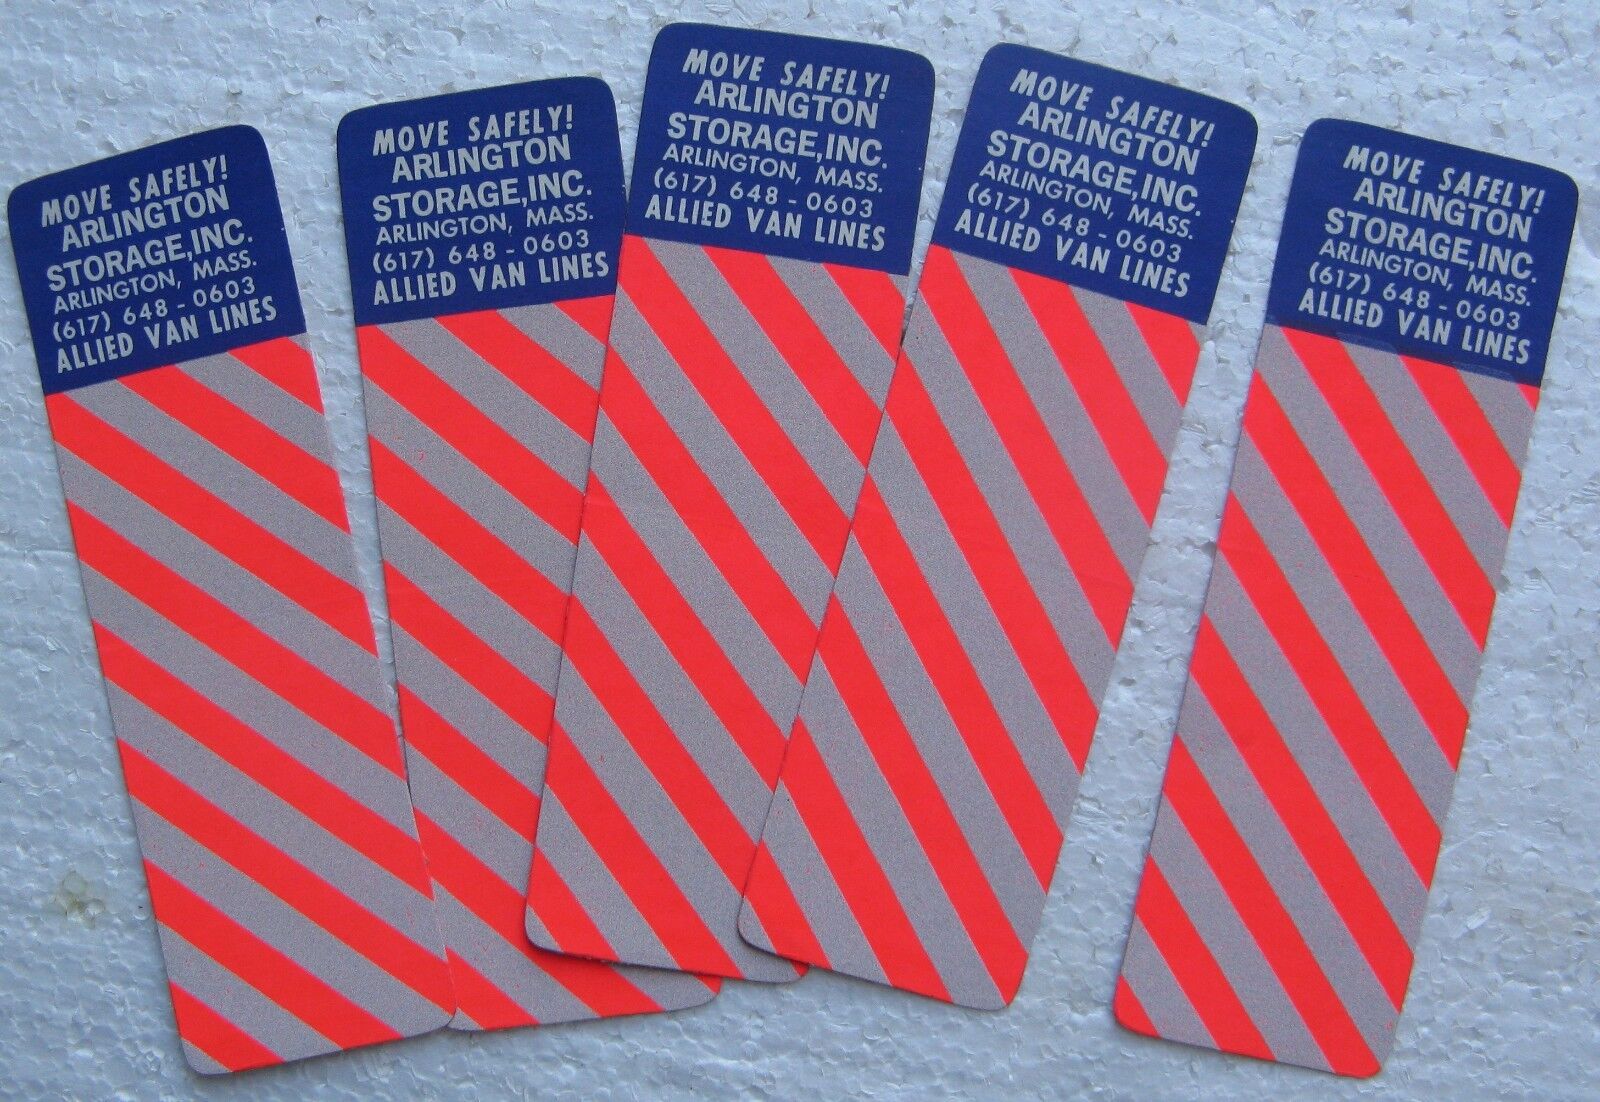 (5) 1970's Safety Decals from Allied Van Lines, Arlington Storage, Arlington, MA